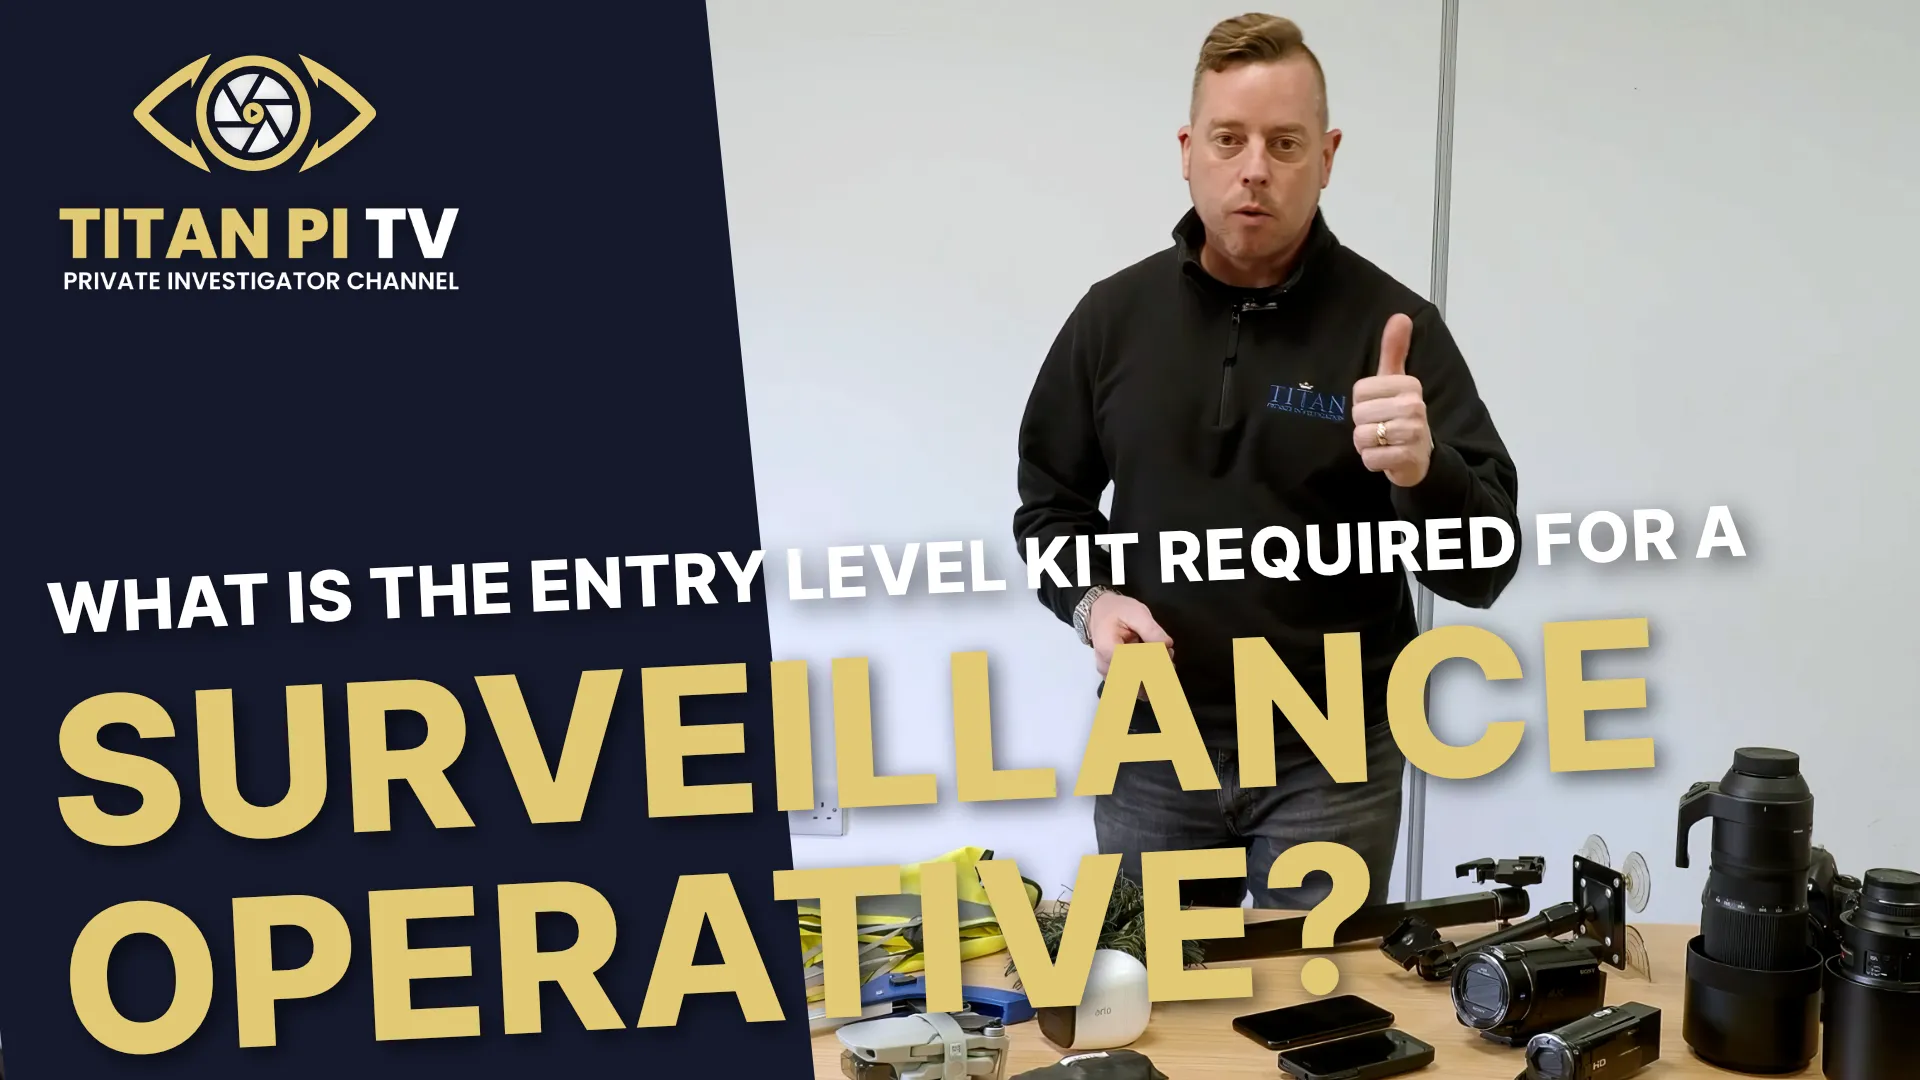 What Is The Entry Level Kit Required For A Surveillance Operative E55 | Titan PI TV